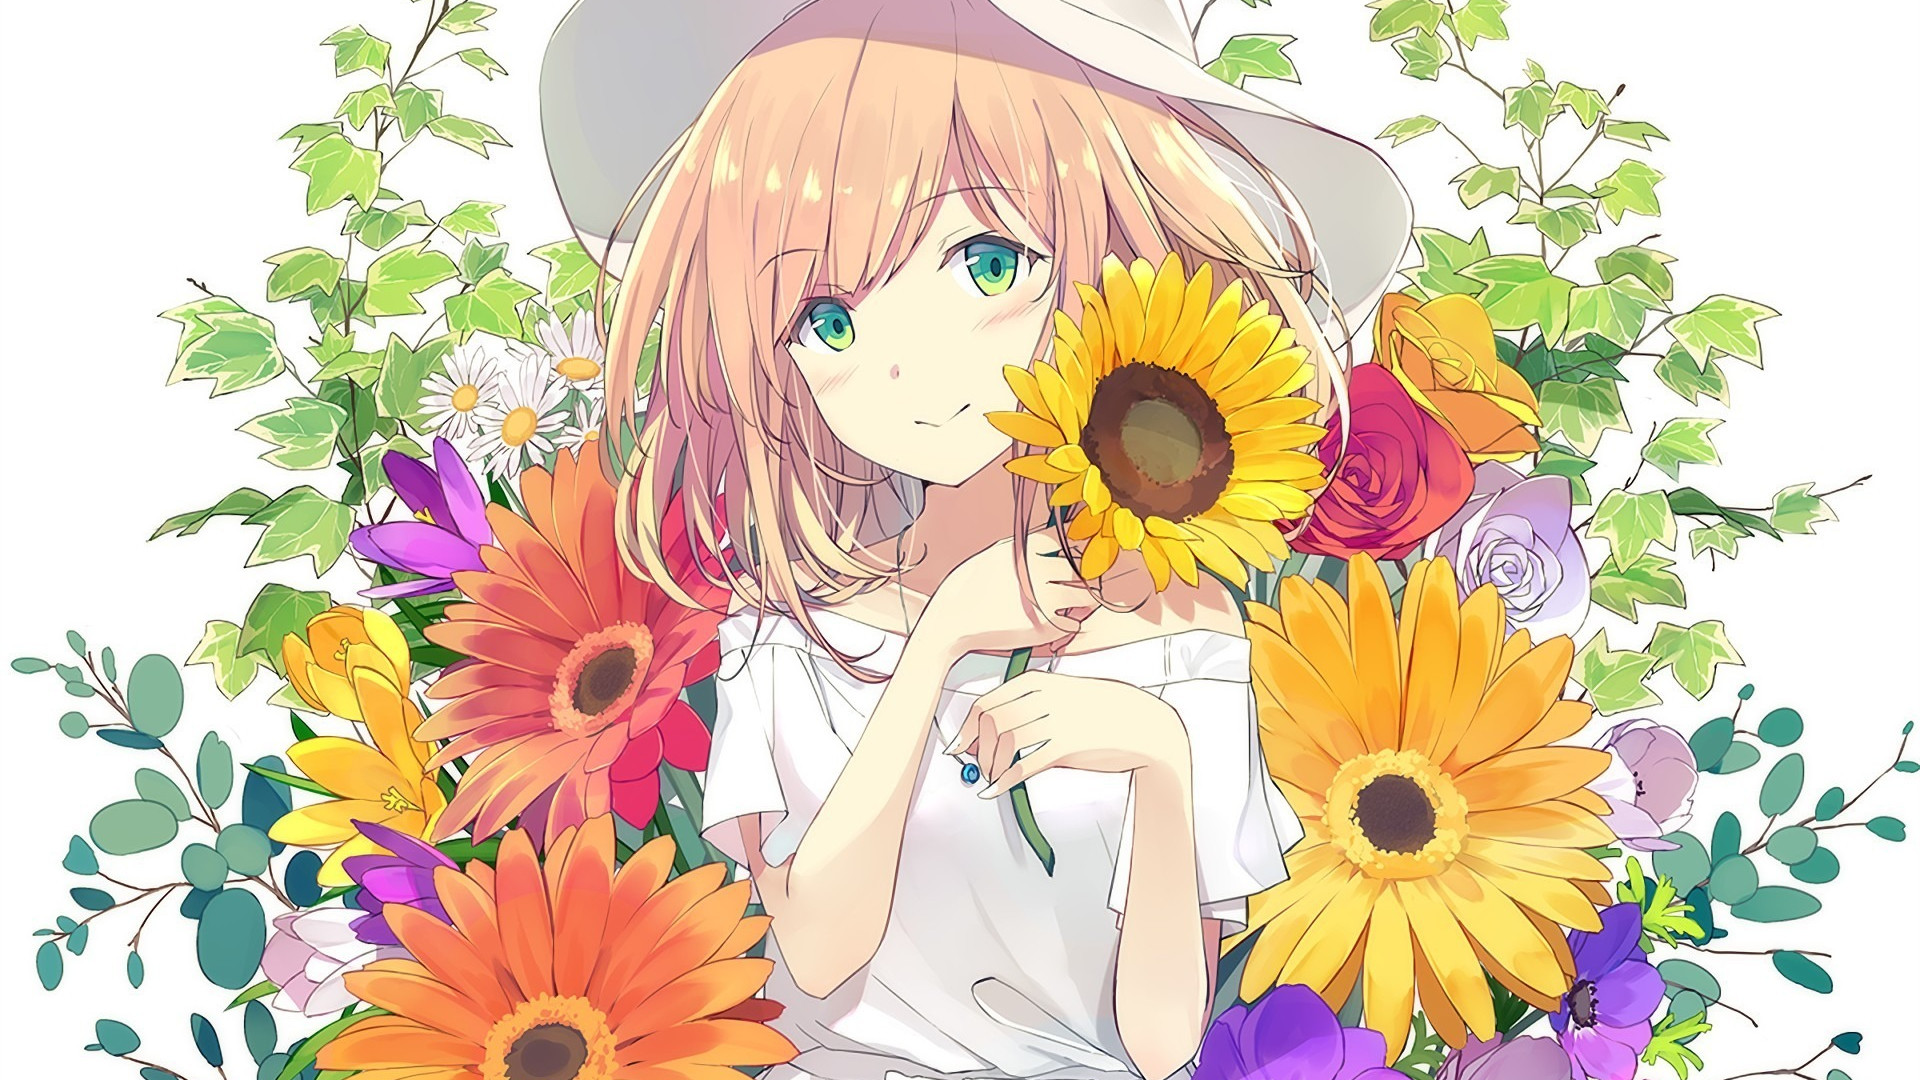 anime flowers, anime flowers gif, anime flowers background, anime flowers aesthetic, anime flower wallpaper, anime flower crown, anime flowers name, anime flower tattoo, anime flower field gif, anime flower of death,